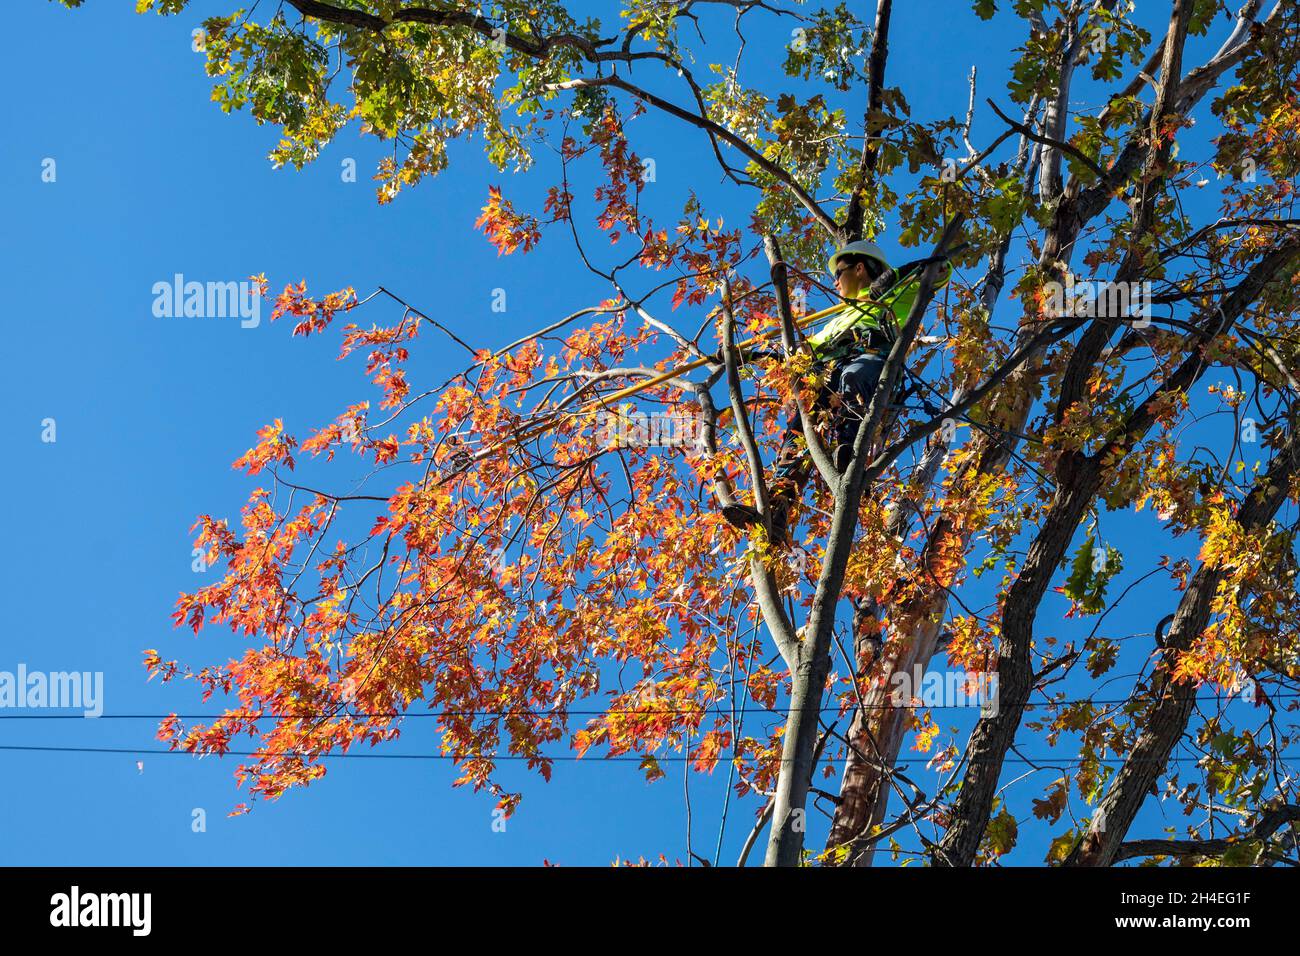 Detroit, Michigan - A contractor for DTE Energy trims tree branches hanging over the utility's electric power lines. The work is intended to reduce po Stock Photo